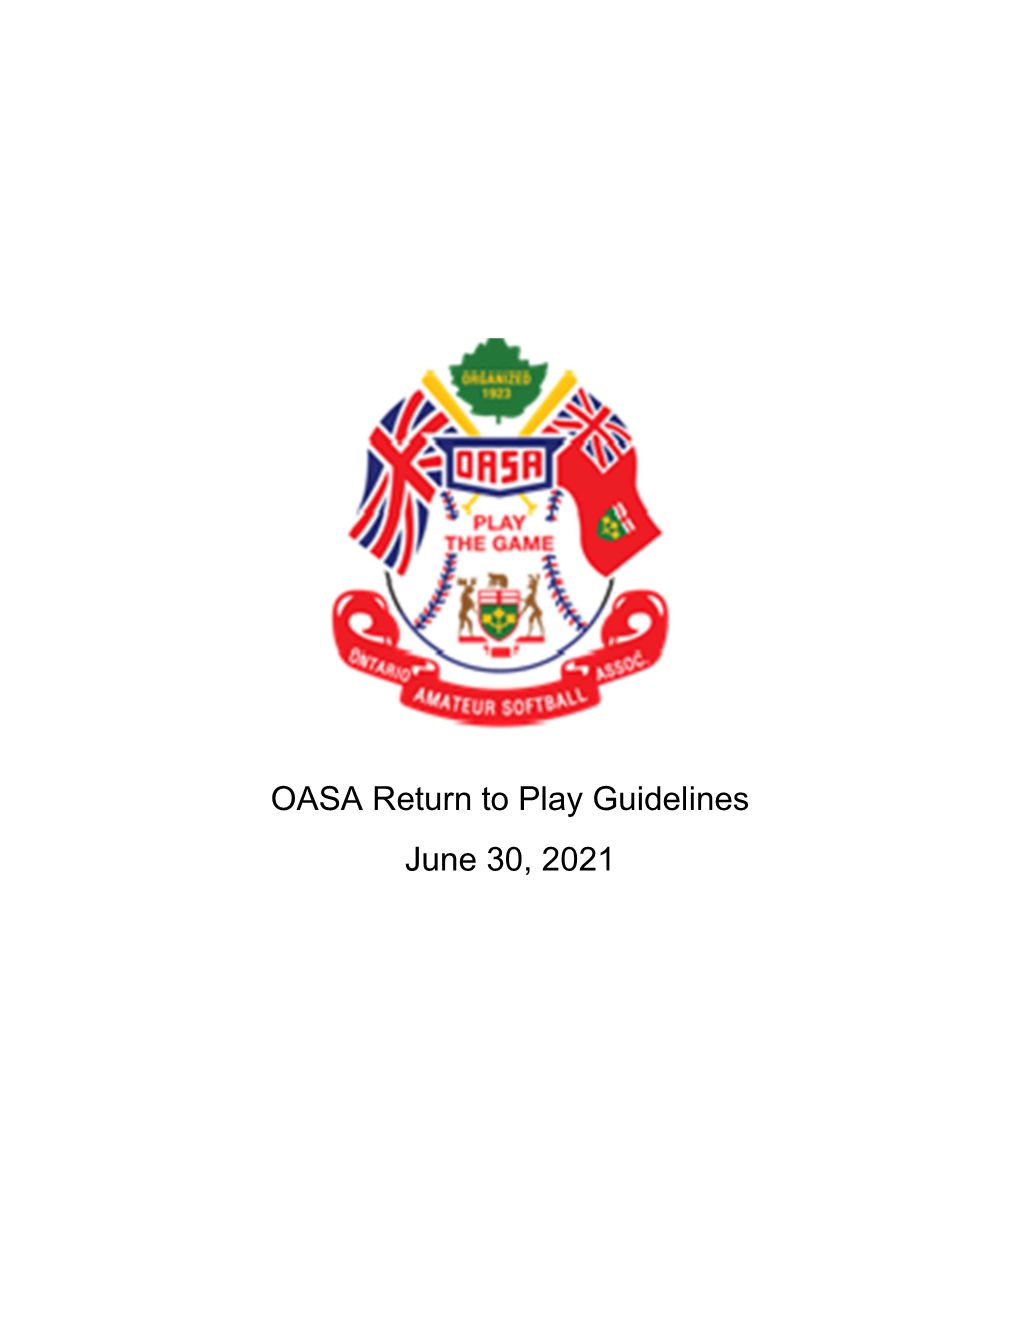 OASA Return to Play Guidelines June 30, 2021